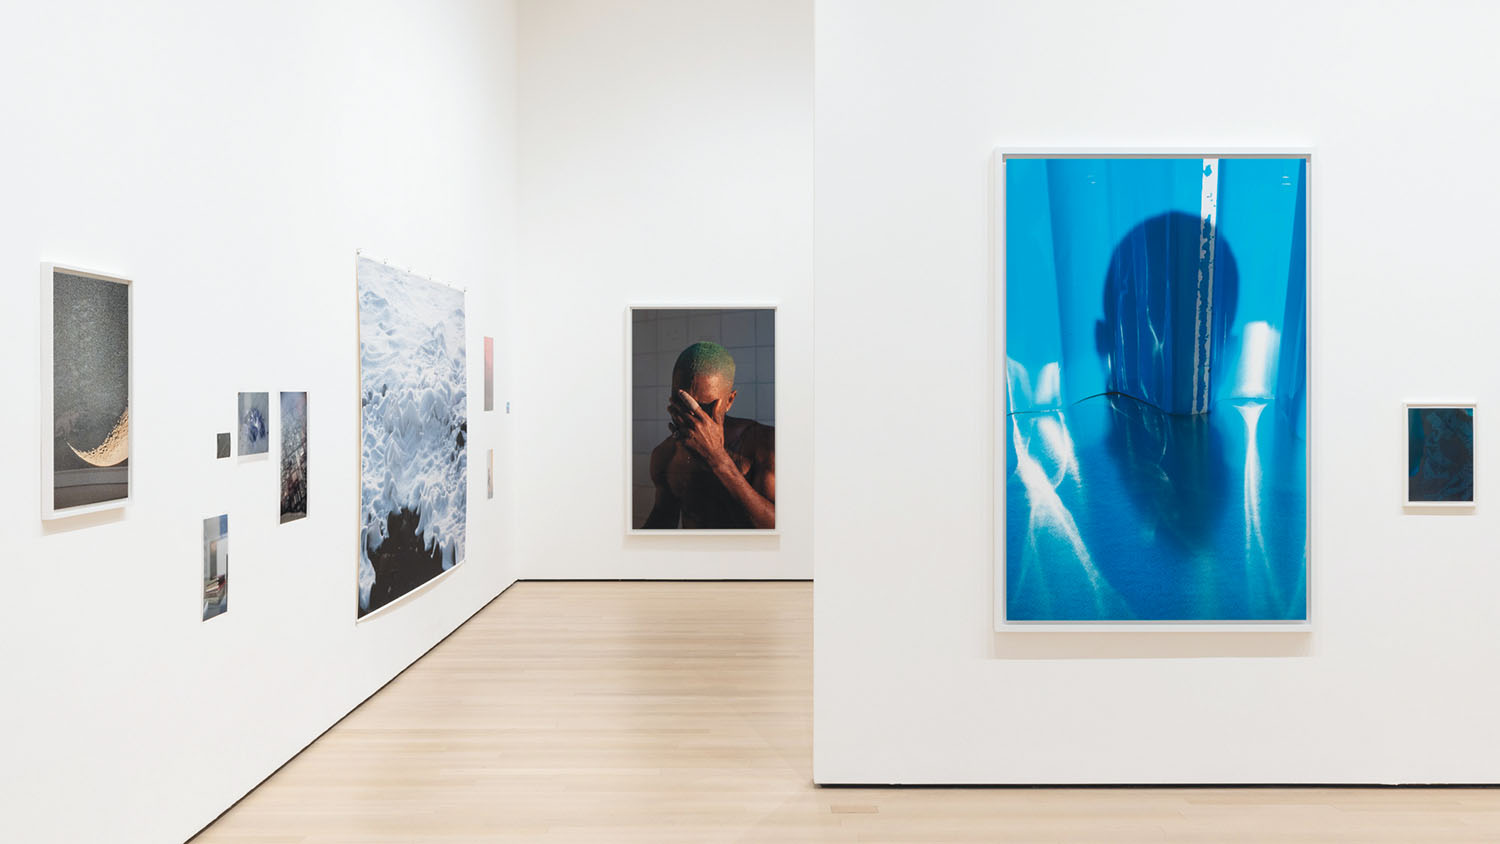 Wolfgang-Tillmann-To-look-without-fear